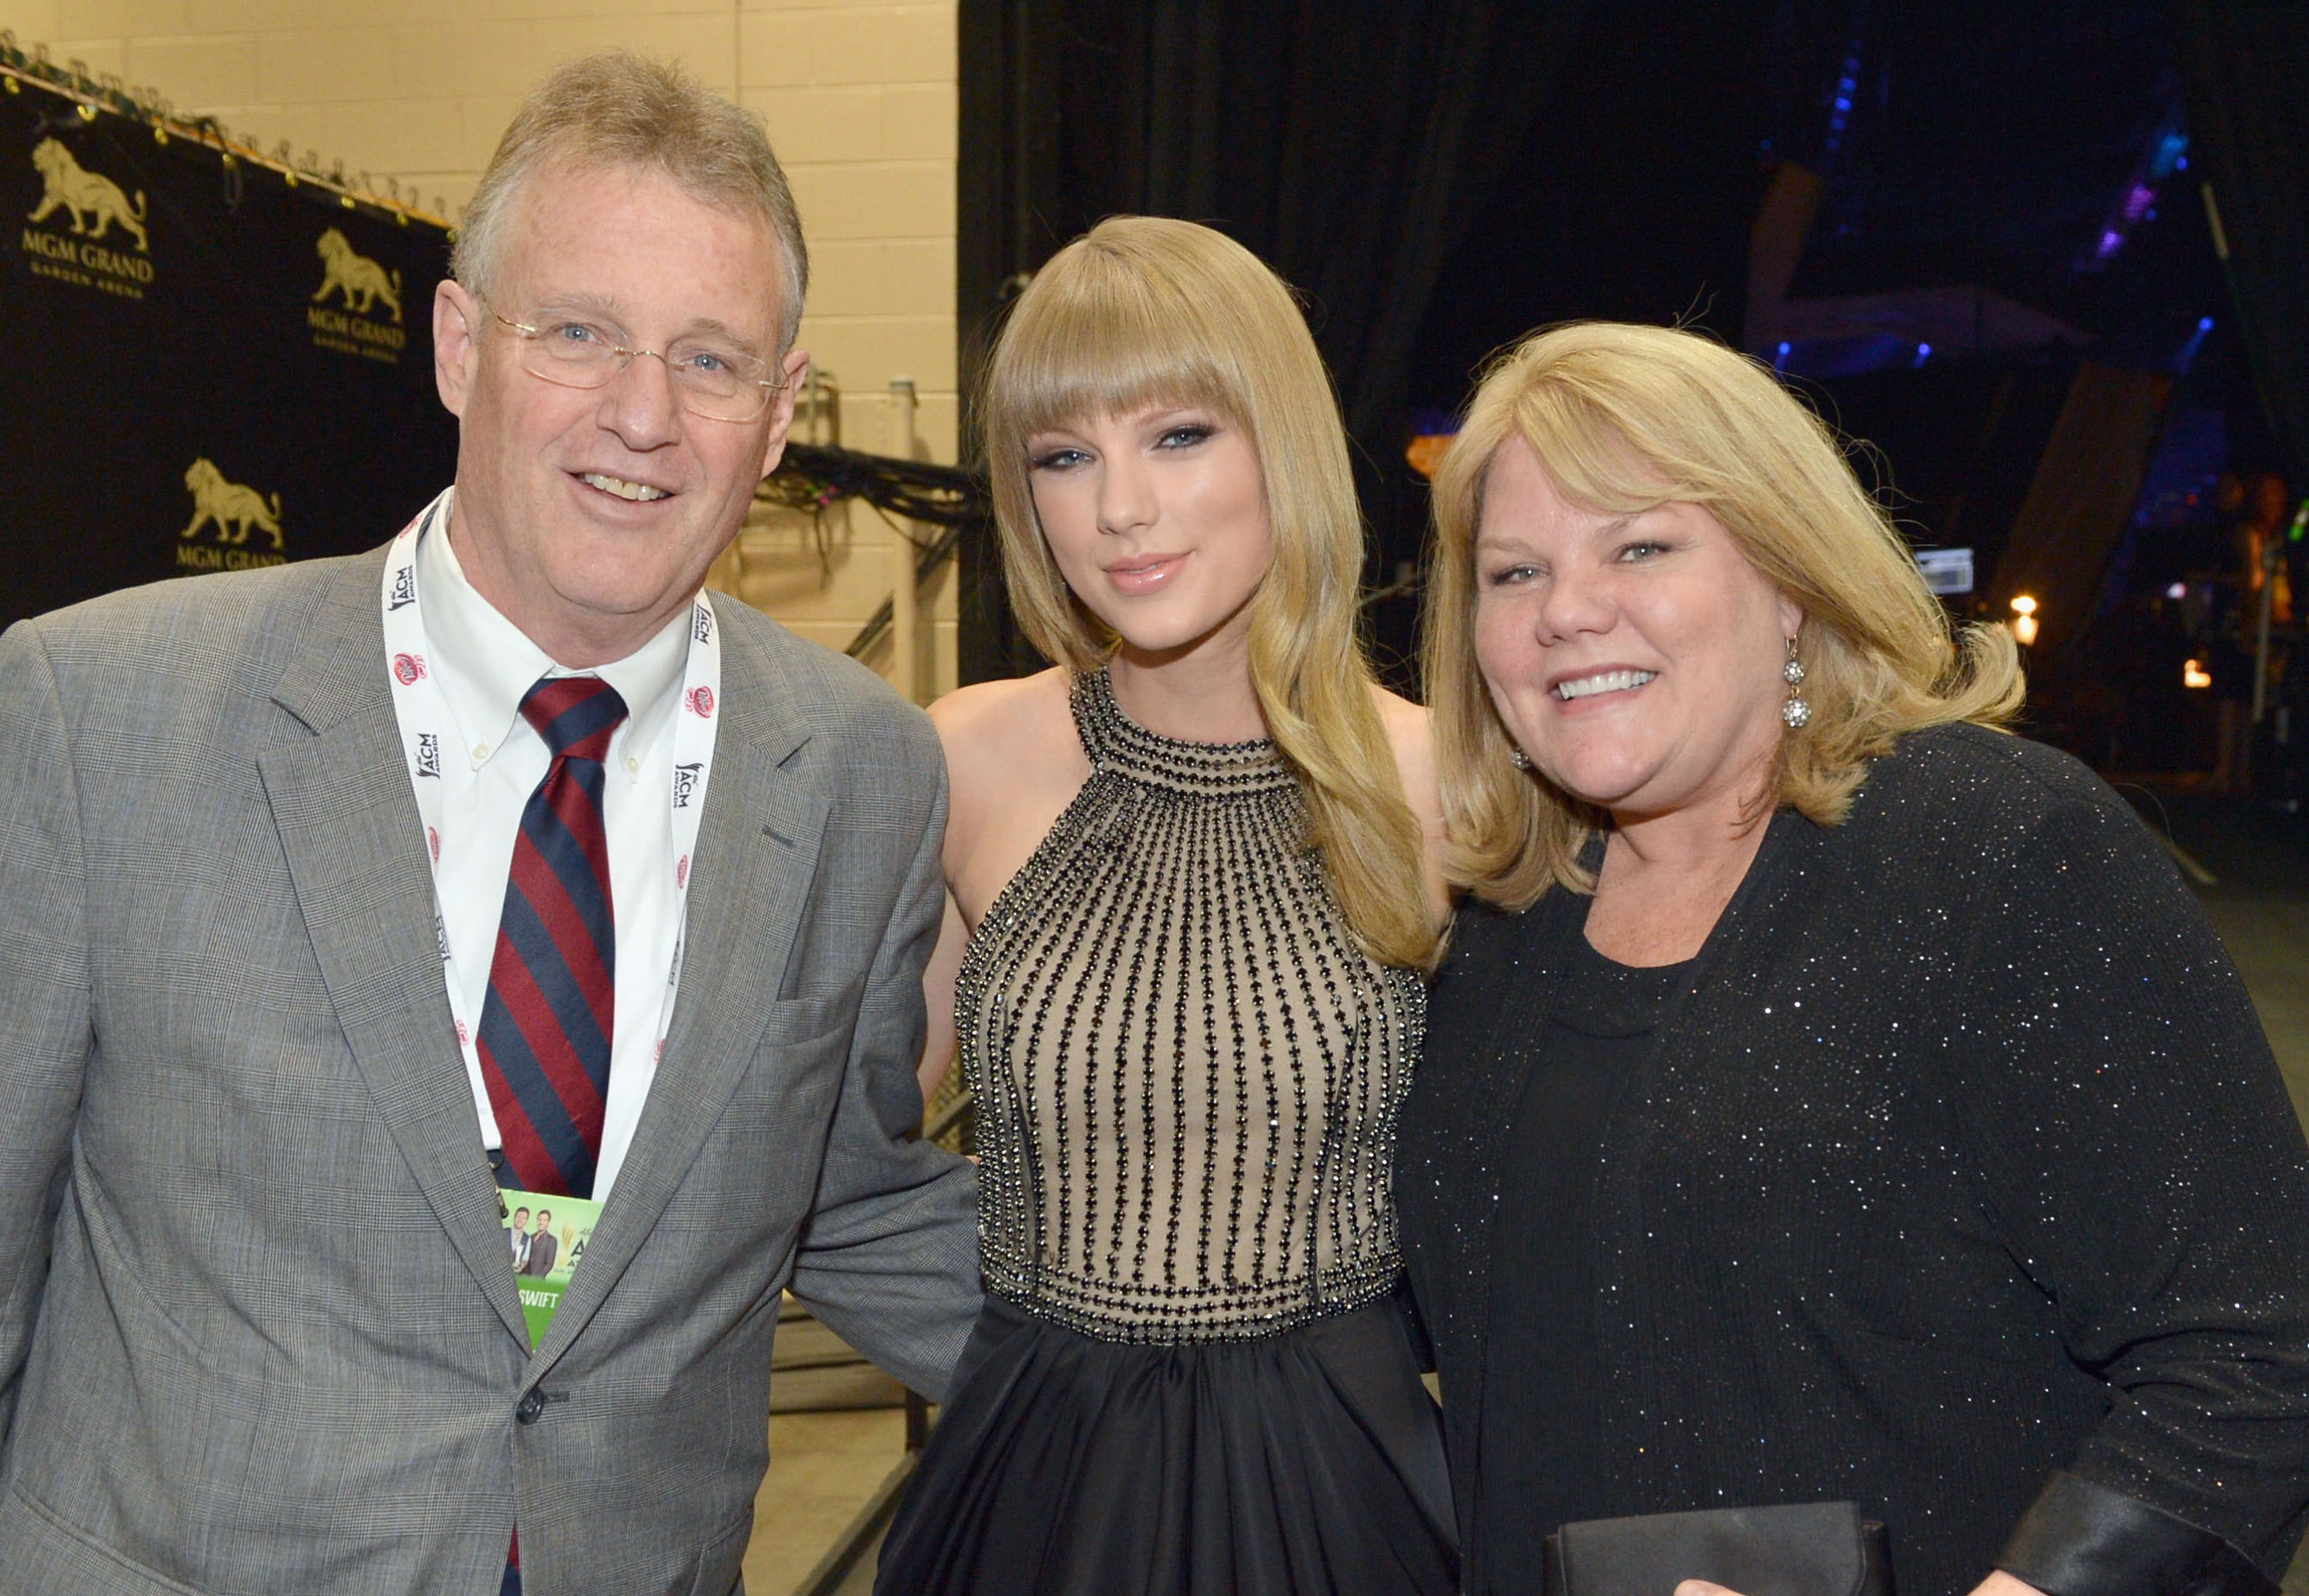 Taylor Swift Opens Up About Her Parents' Battles With Cancer | J-14